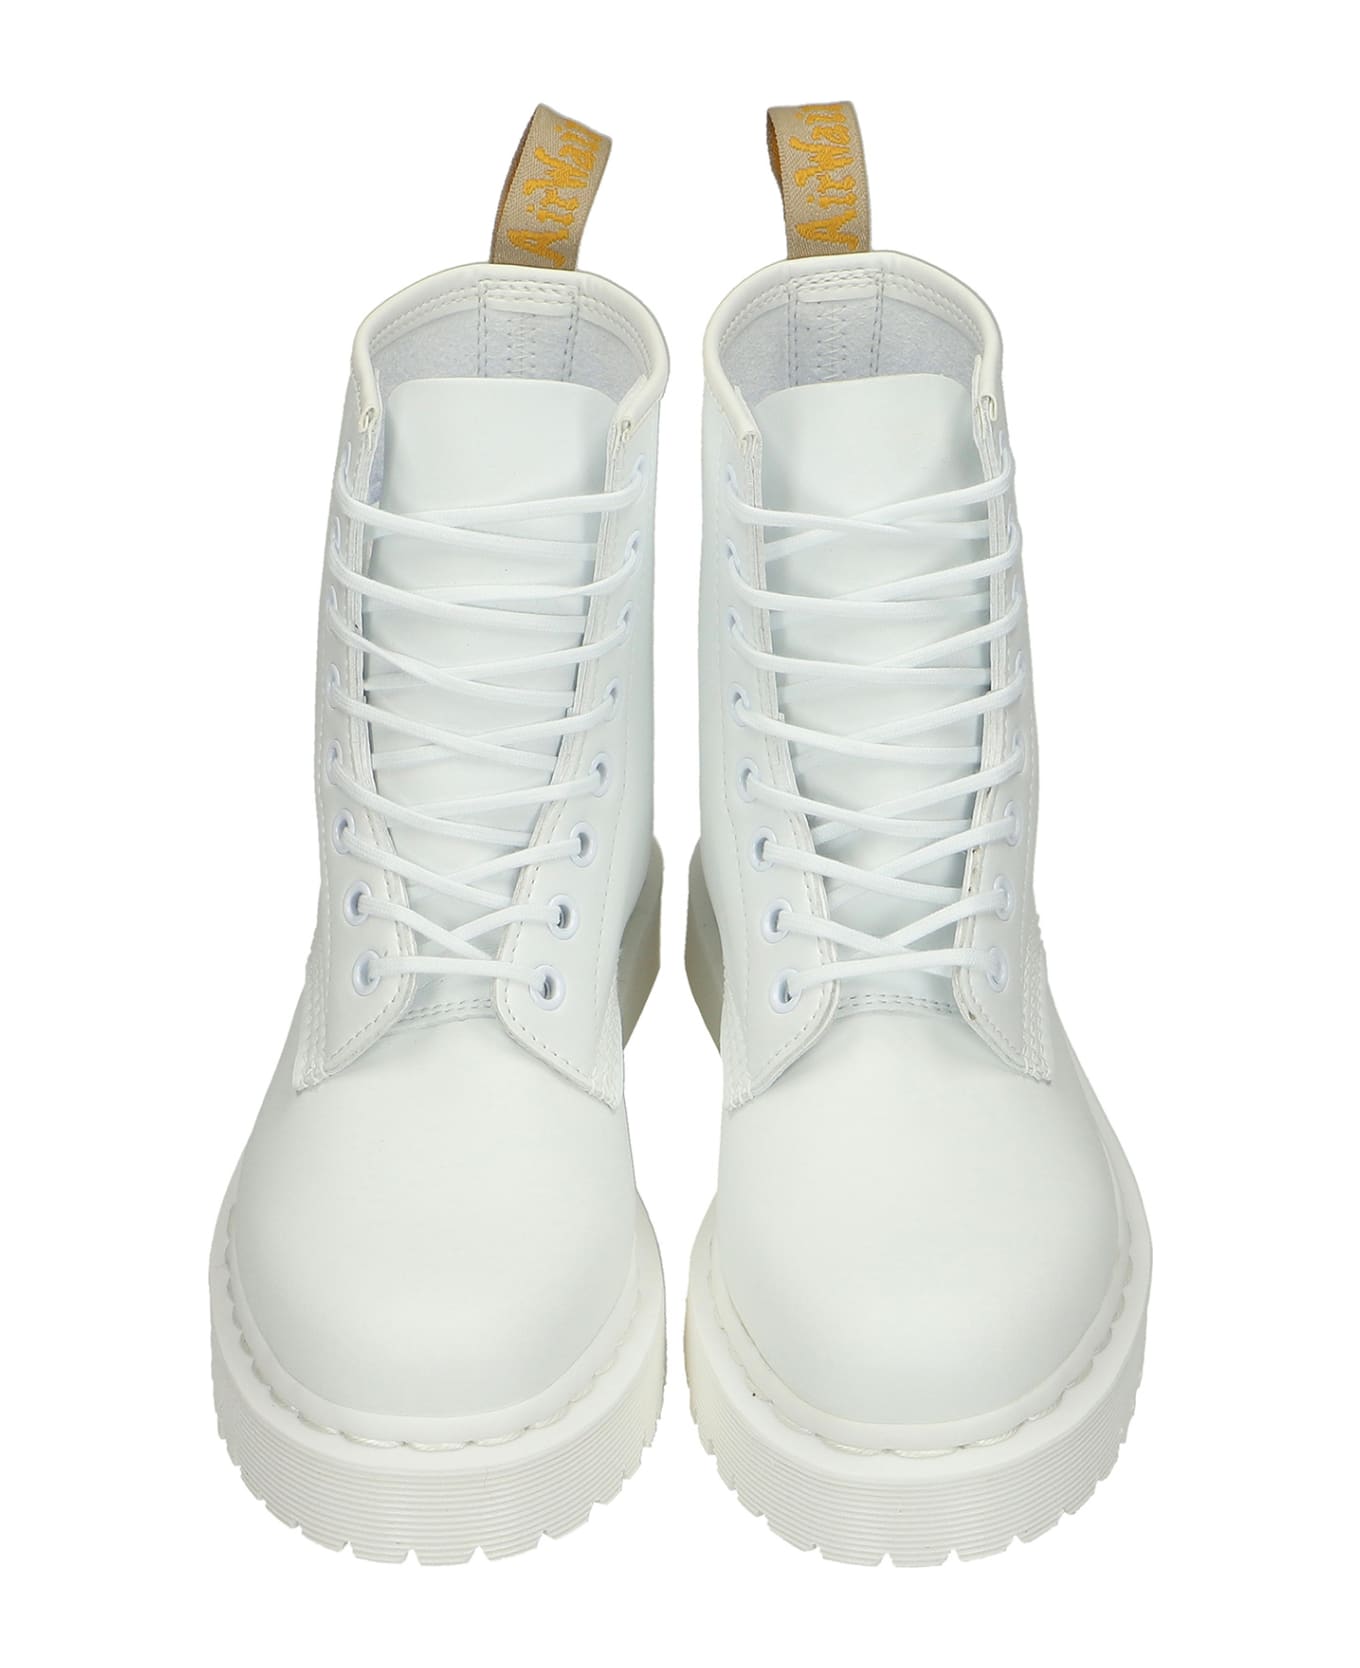 Dr. Martens Vegan 1460 Combat Boots In White Leather - white